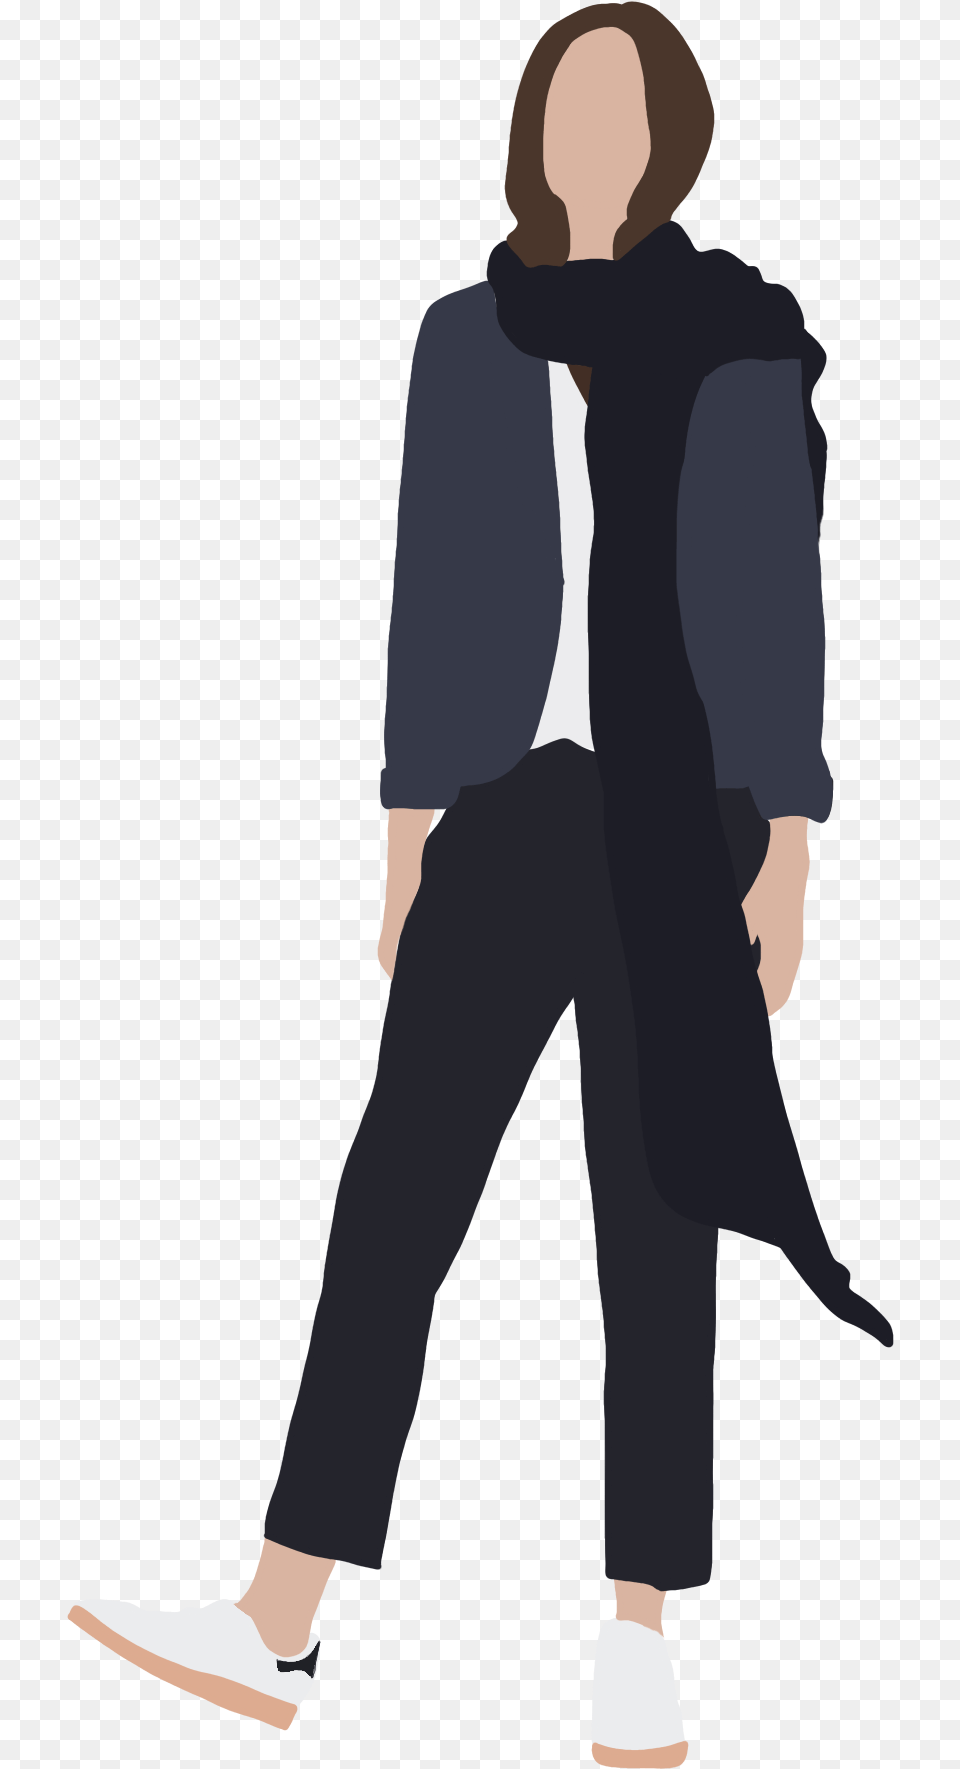 People Flat Illustration People Photoshop Architecture, Walking, Person, Formal Wear, Coat Free Transparent Png